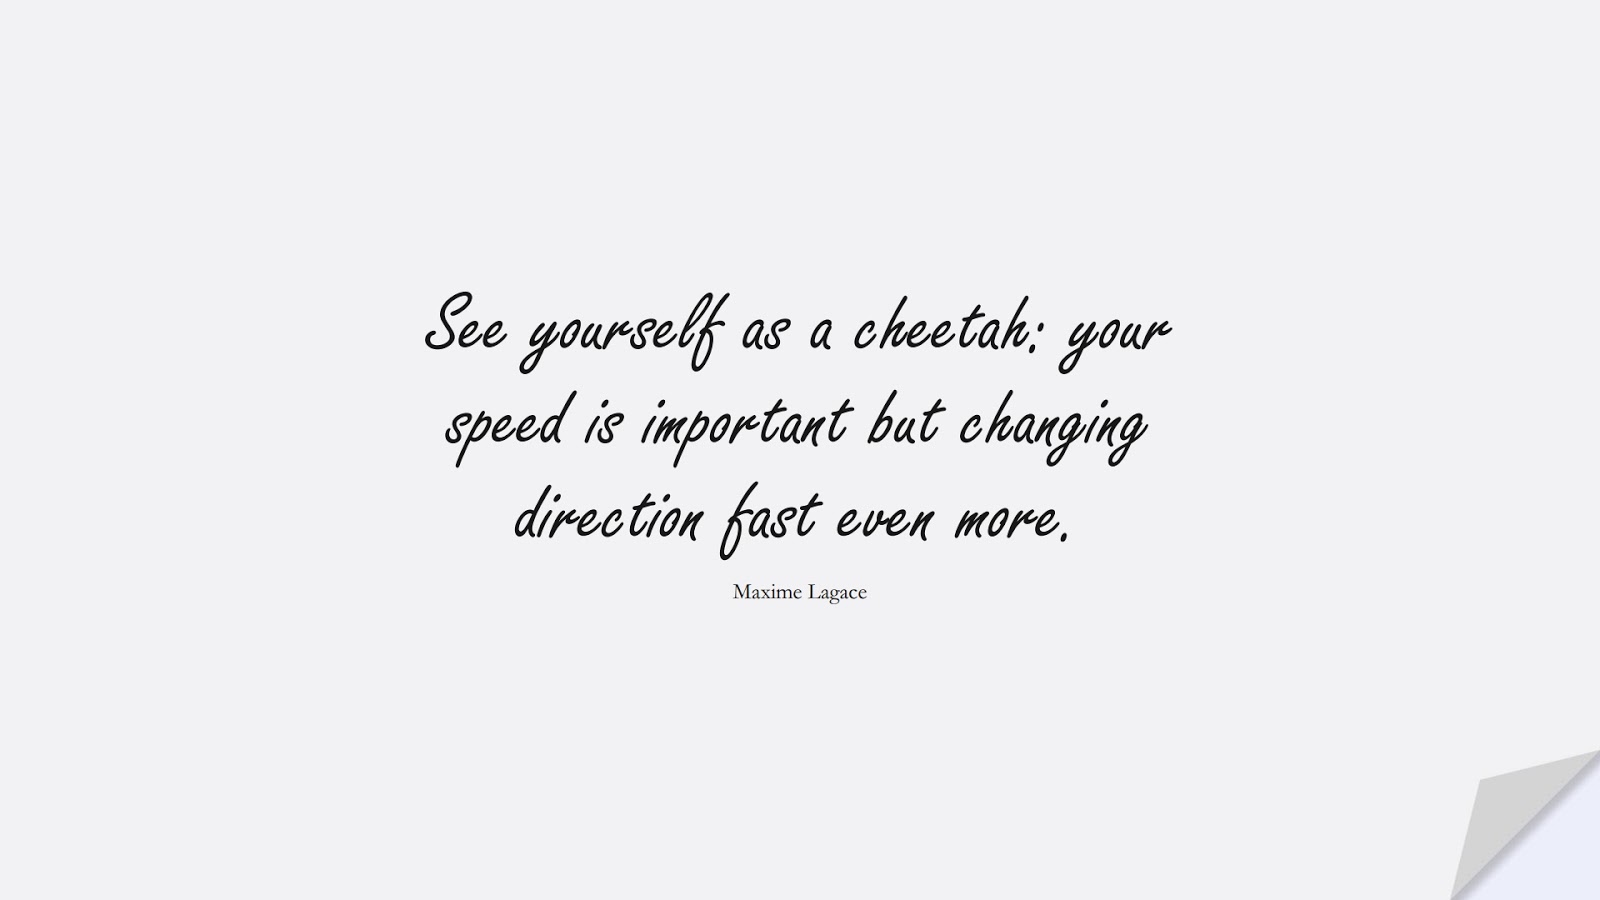 See yourself as a cheetah: your speed is important but changing direction fast even more. (Maxime Lagace);  #ChangeQuotes